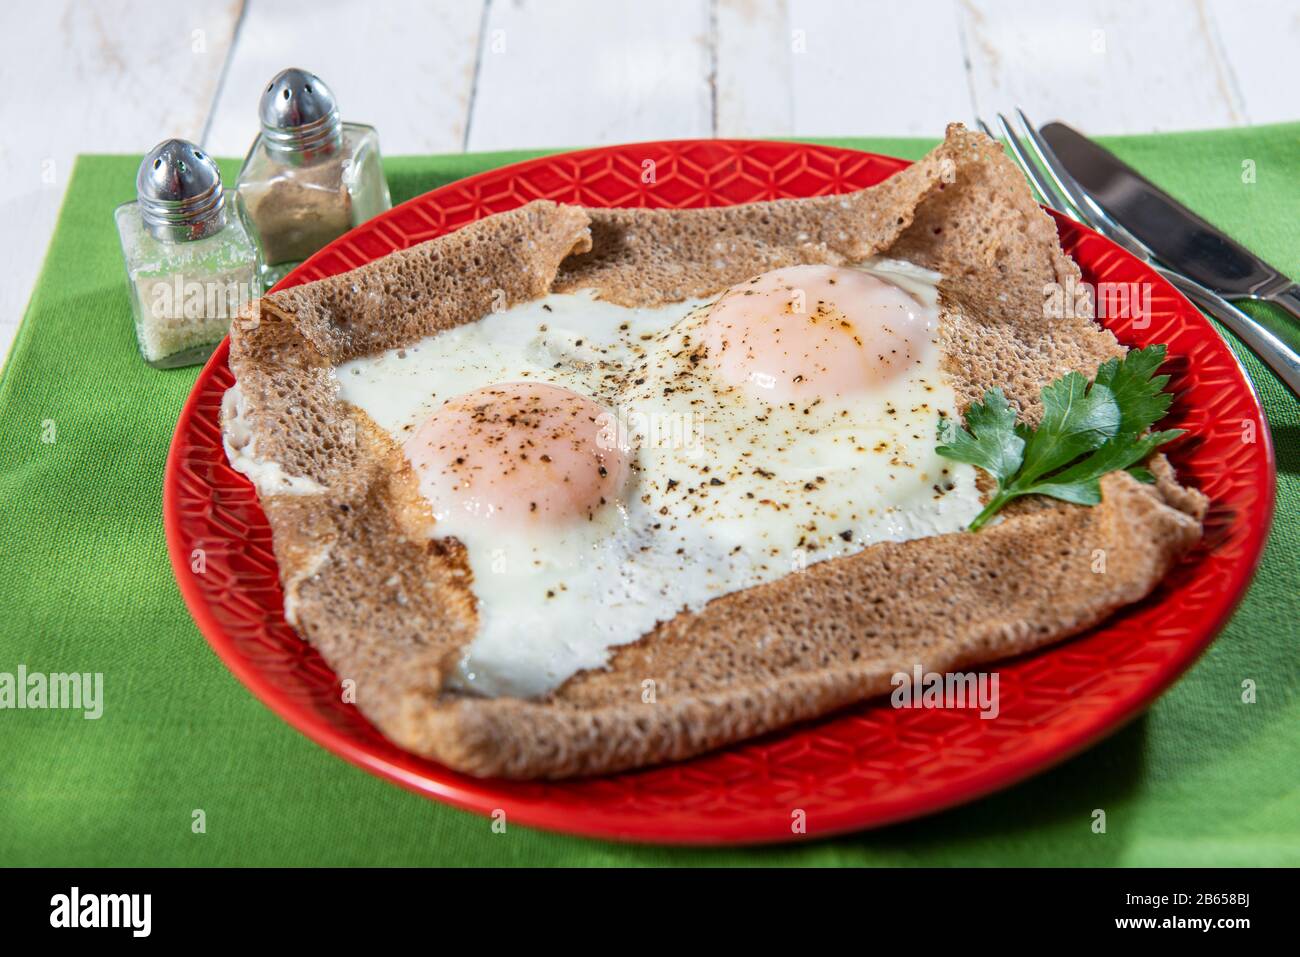 homemade Breton crepe with egg in a red plate Stock Photo